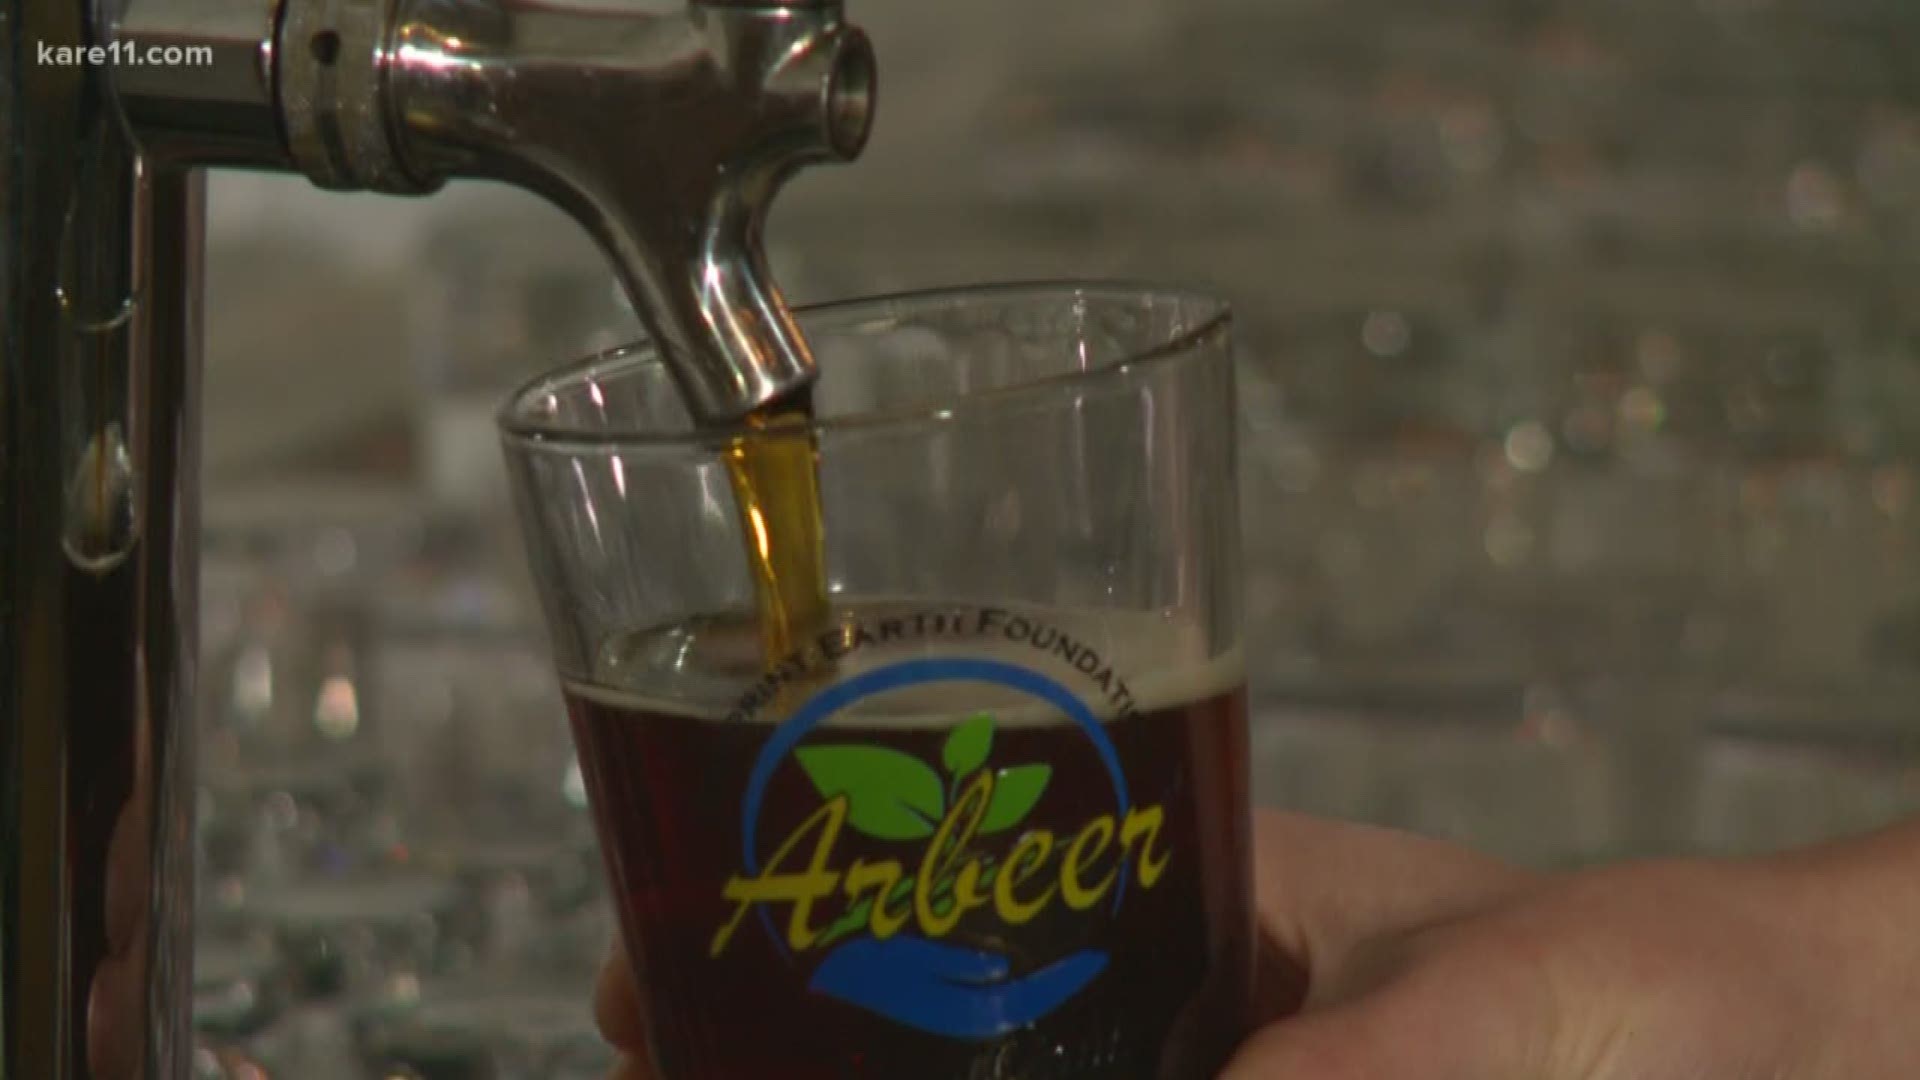 A portion of the proceeds made from 'Arbeer' will benefit environmental projects in communities across the Twin Cities metro area.